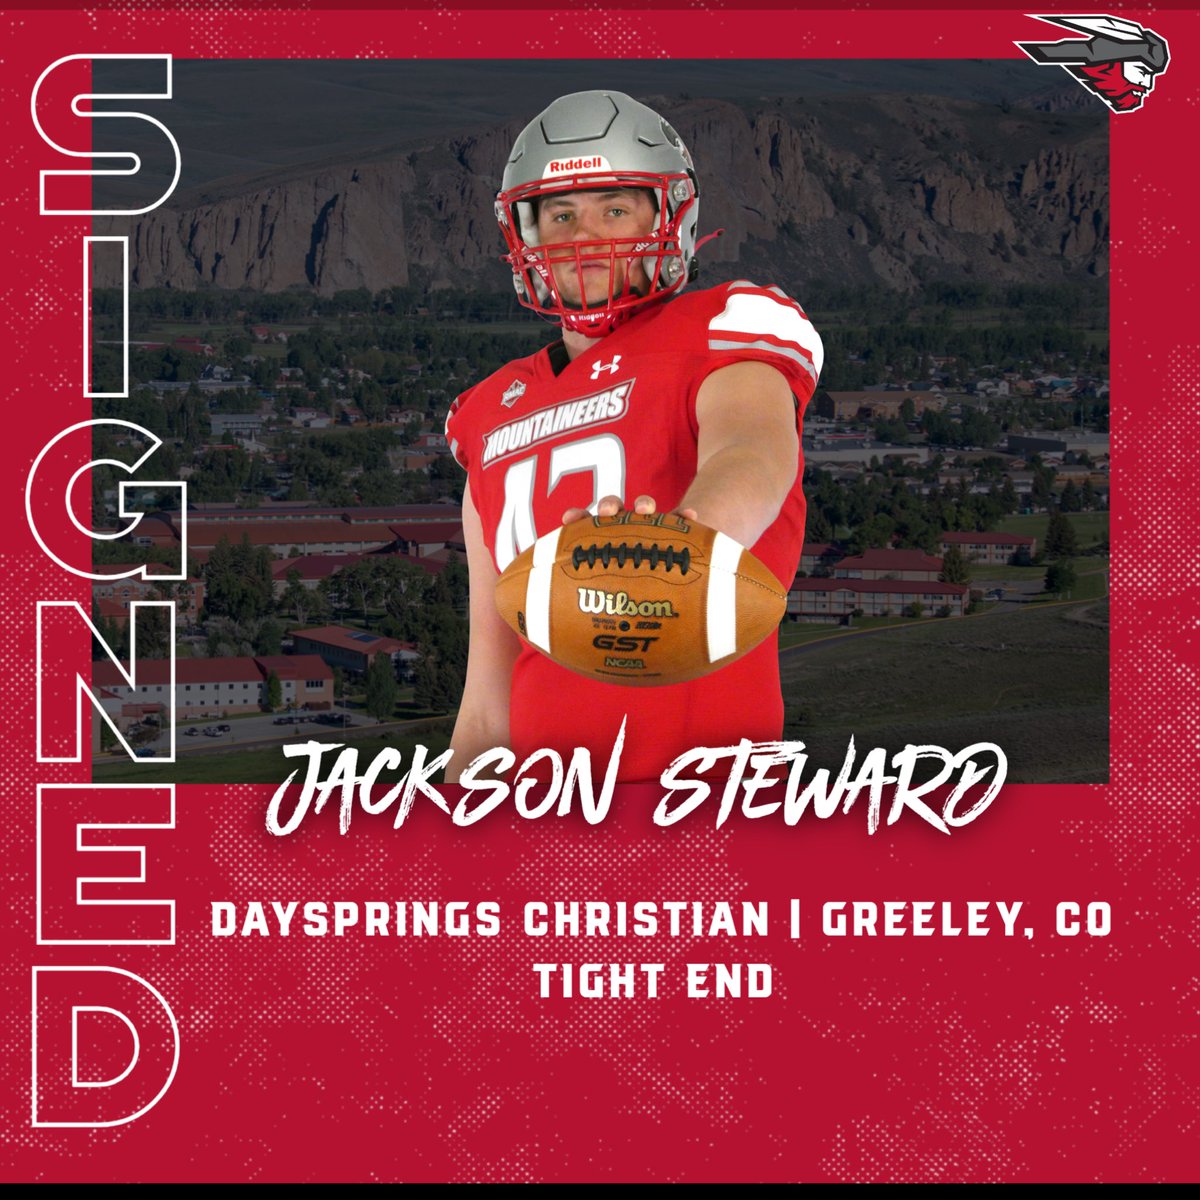 Welcome to Gunnison, America @Jstew43 ! #ThinAirCrew #MountUp